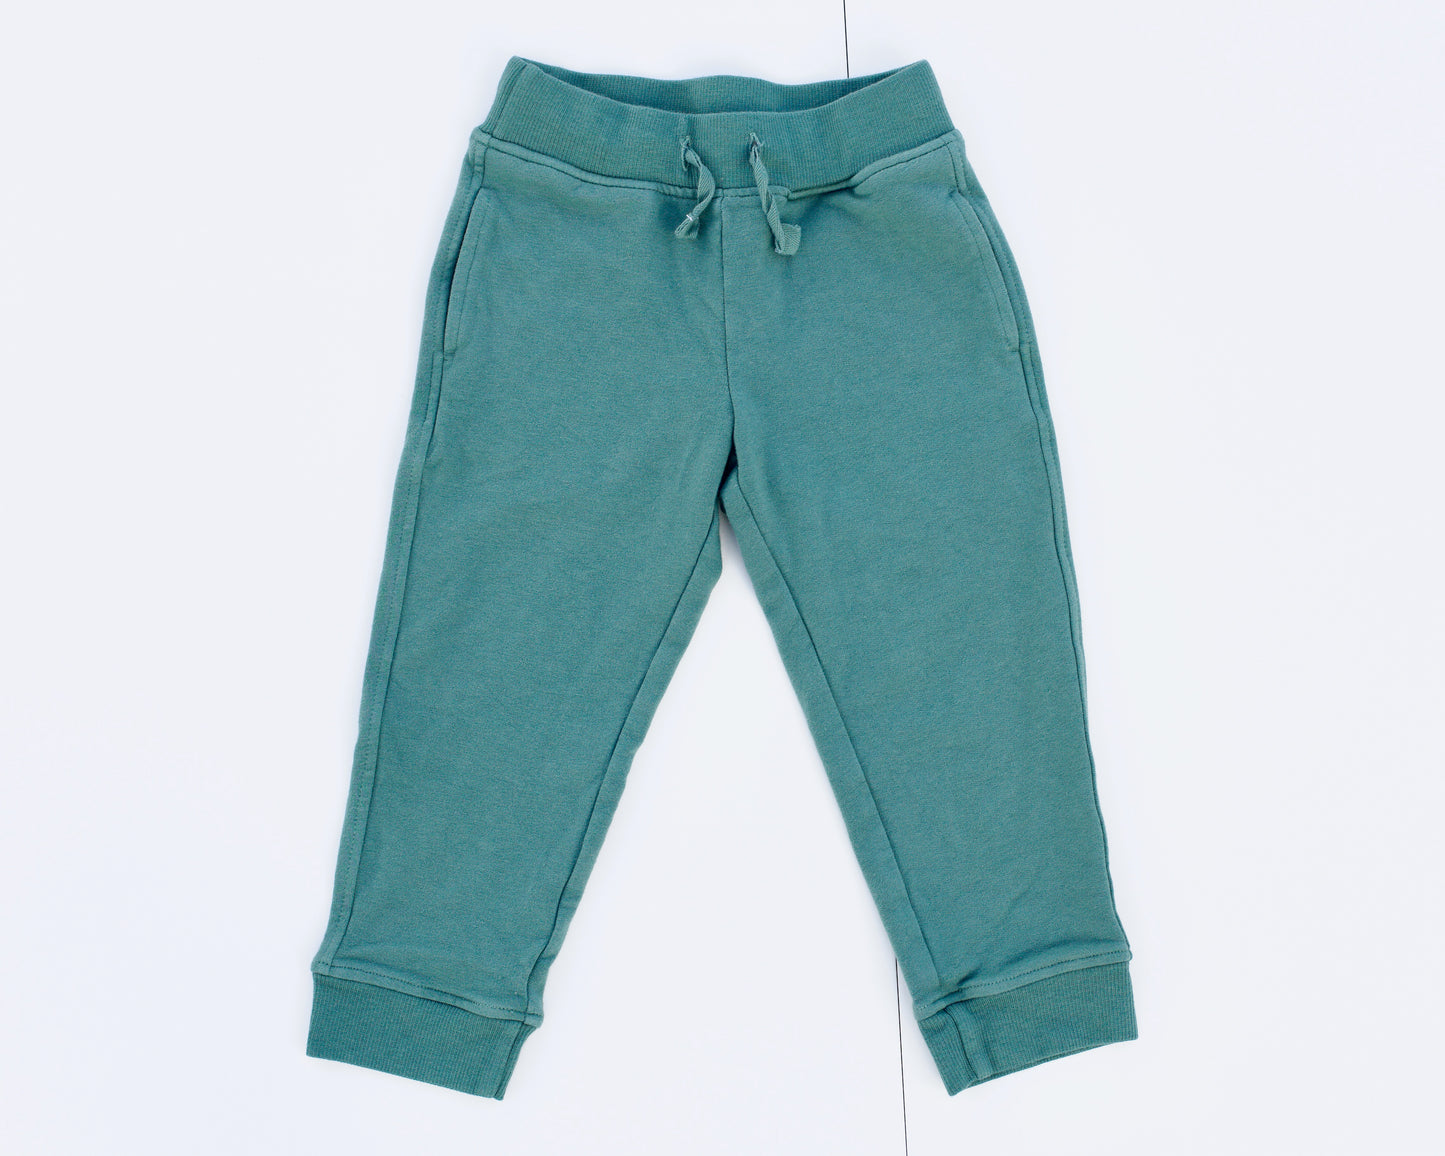 The Stretch Jogger